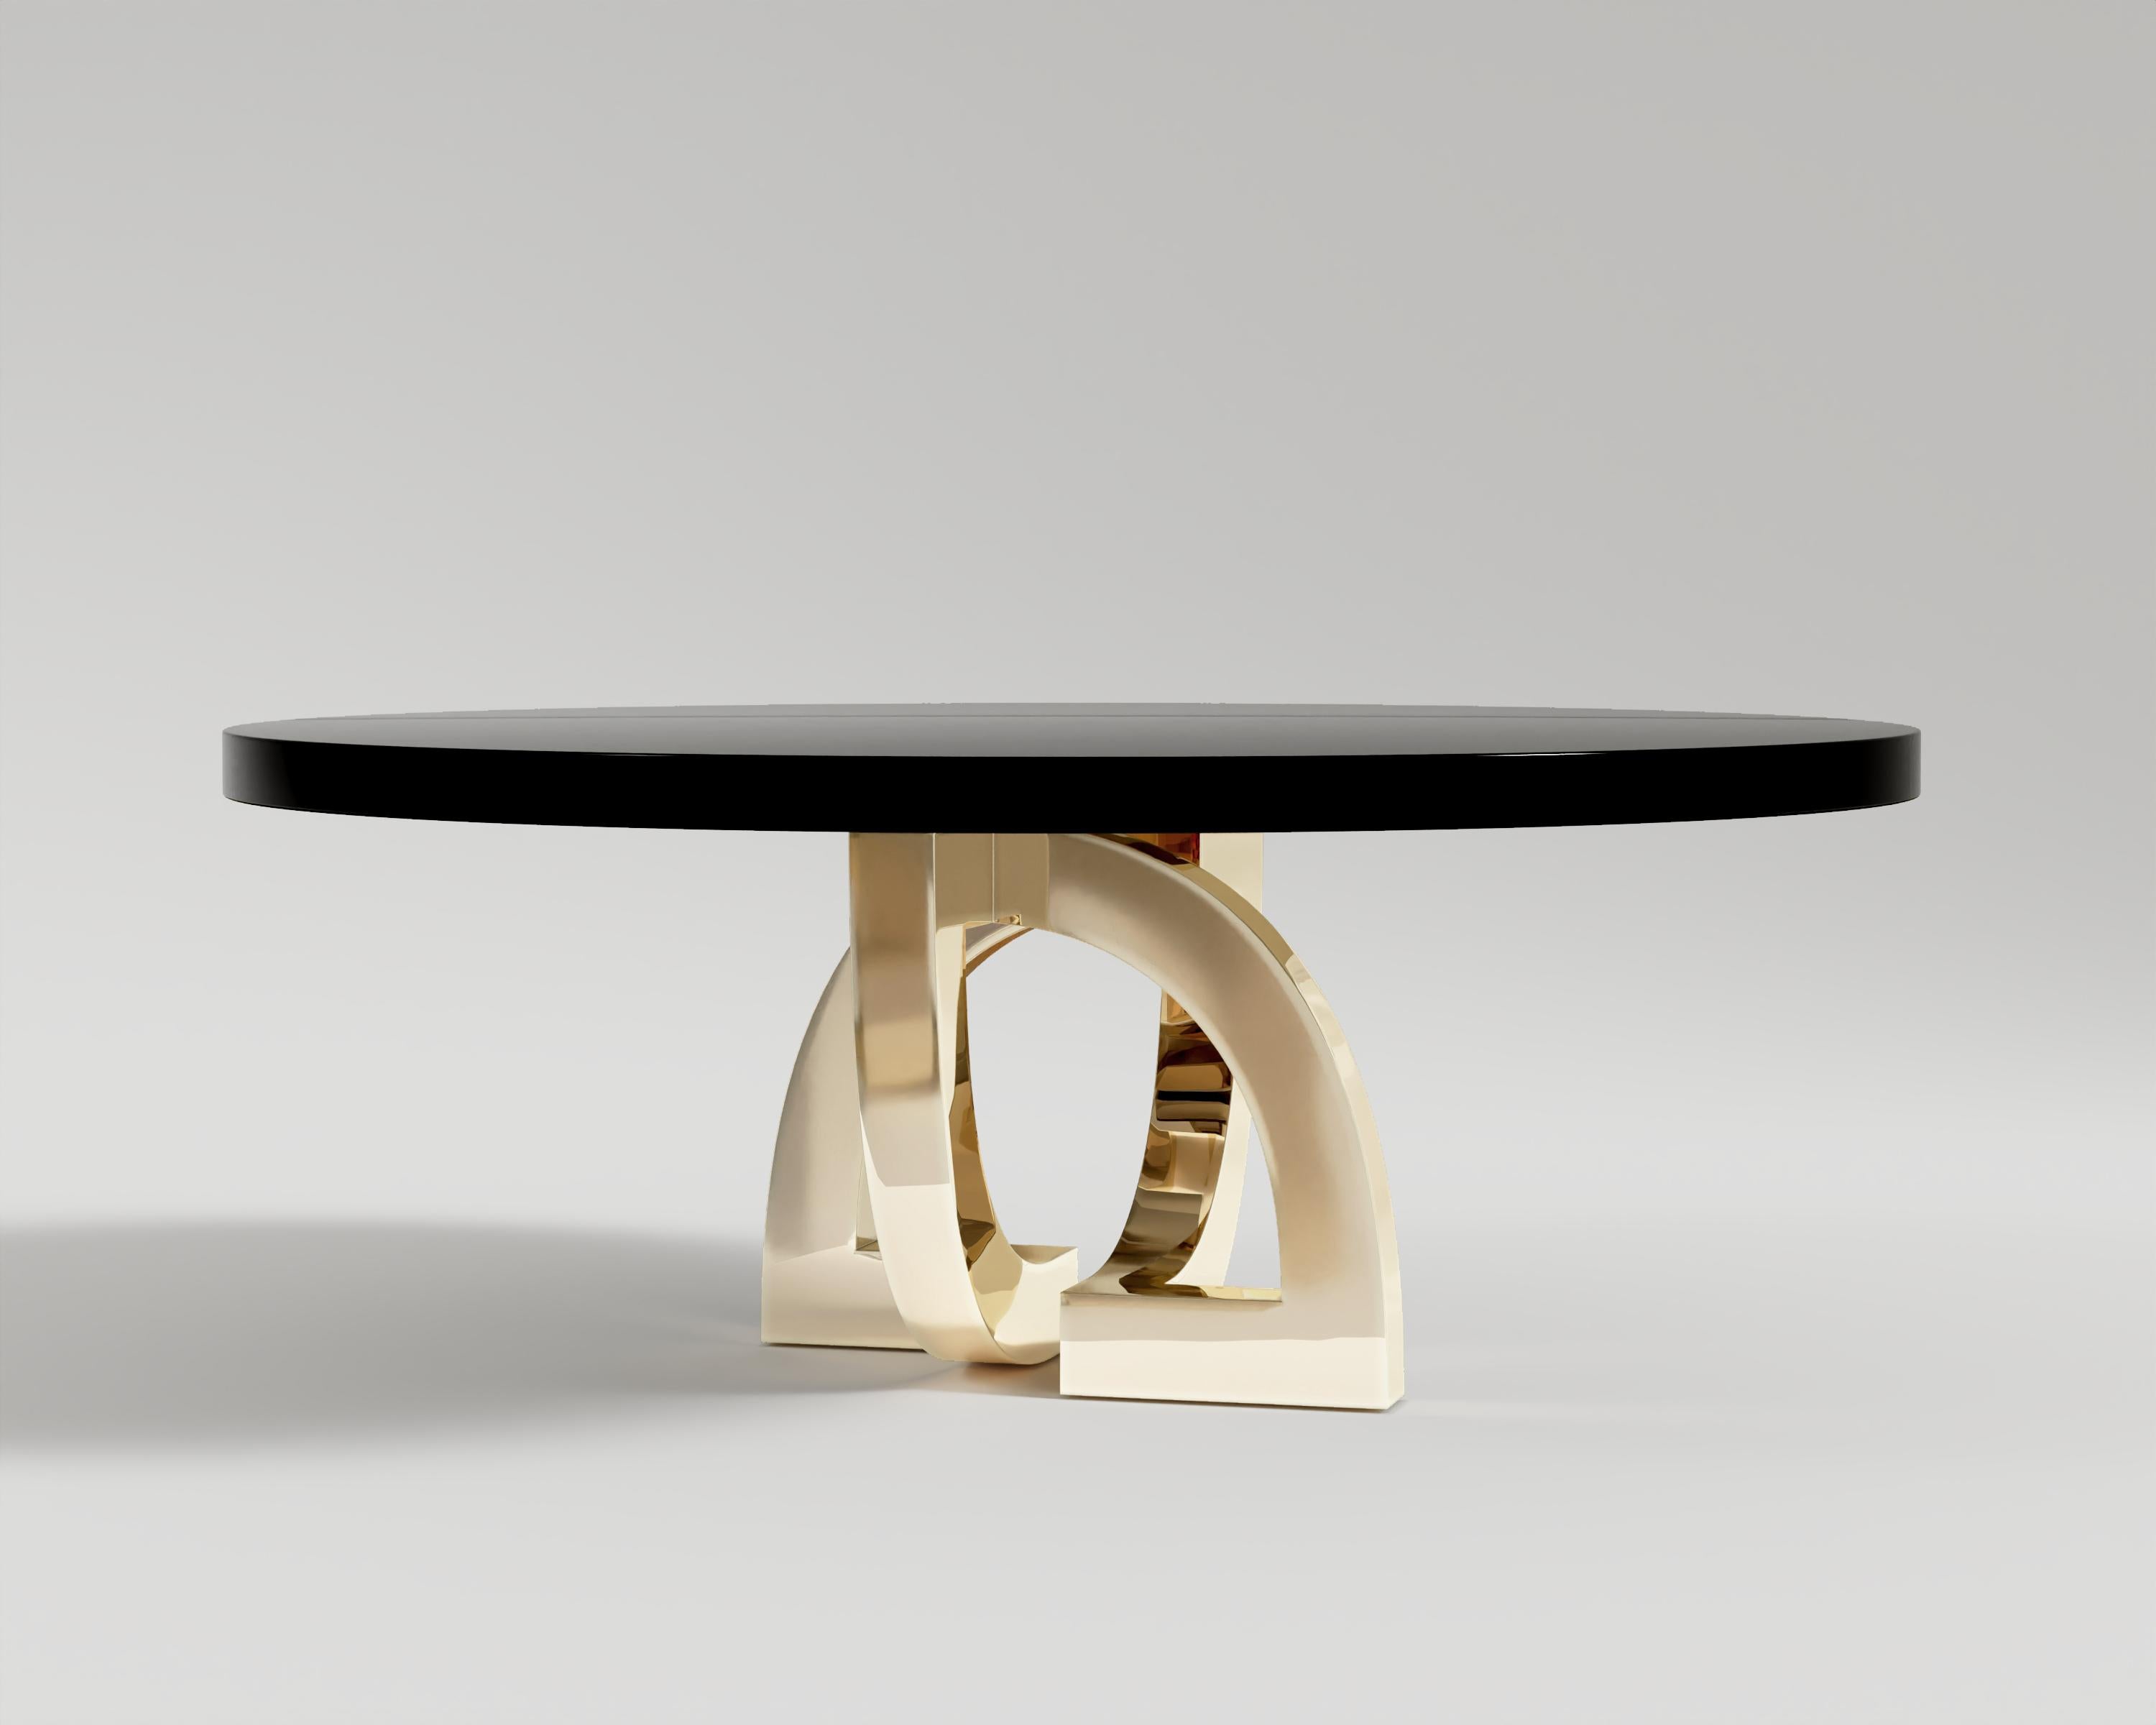 Arco Dining Table

The Arco dining table is not just an ordinary furniture piece, it is way more than that. Arco’s main feature is its abstract base design that, indeed, is a true masterpiece. The base has a combination of organic curves and